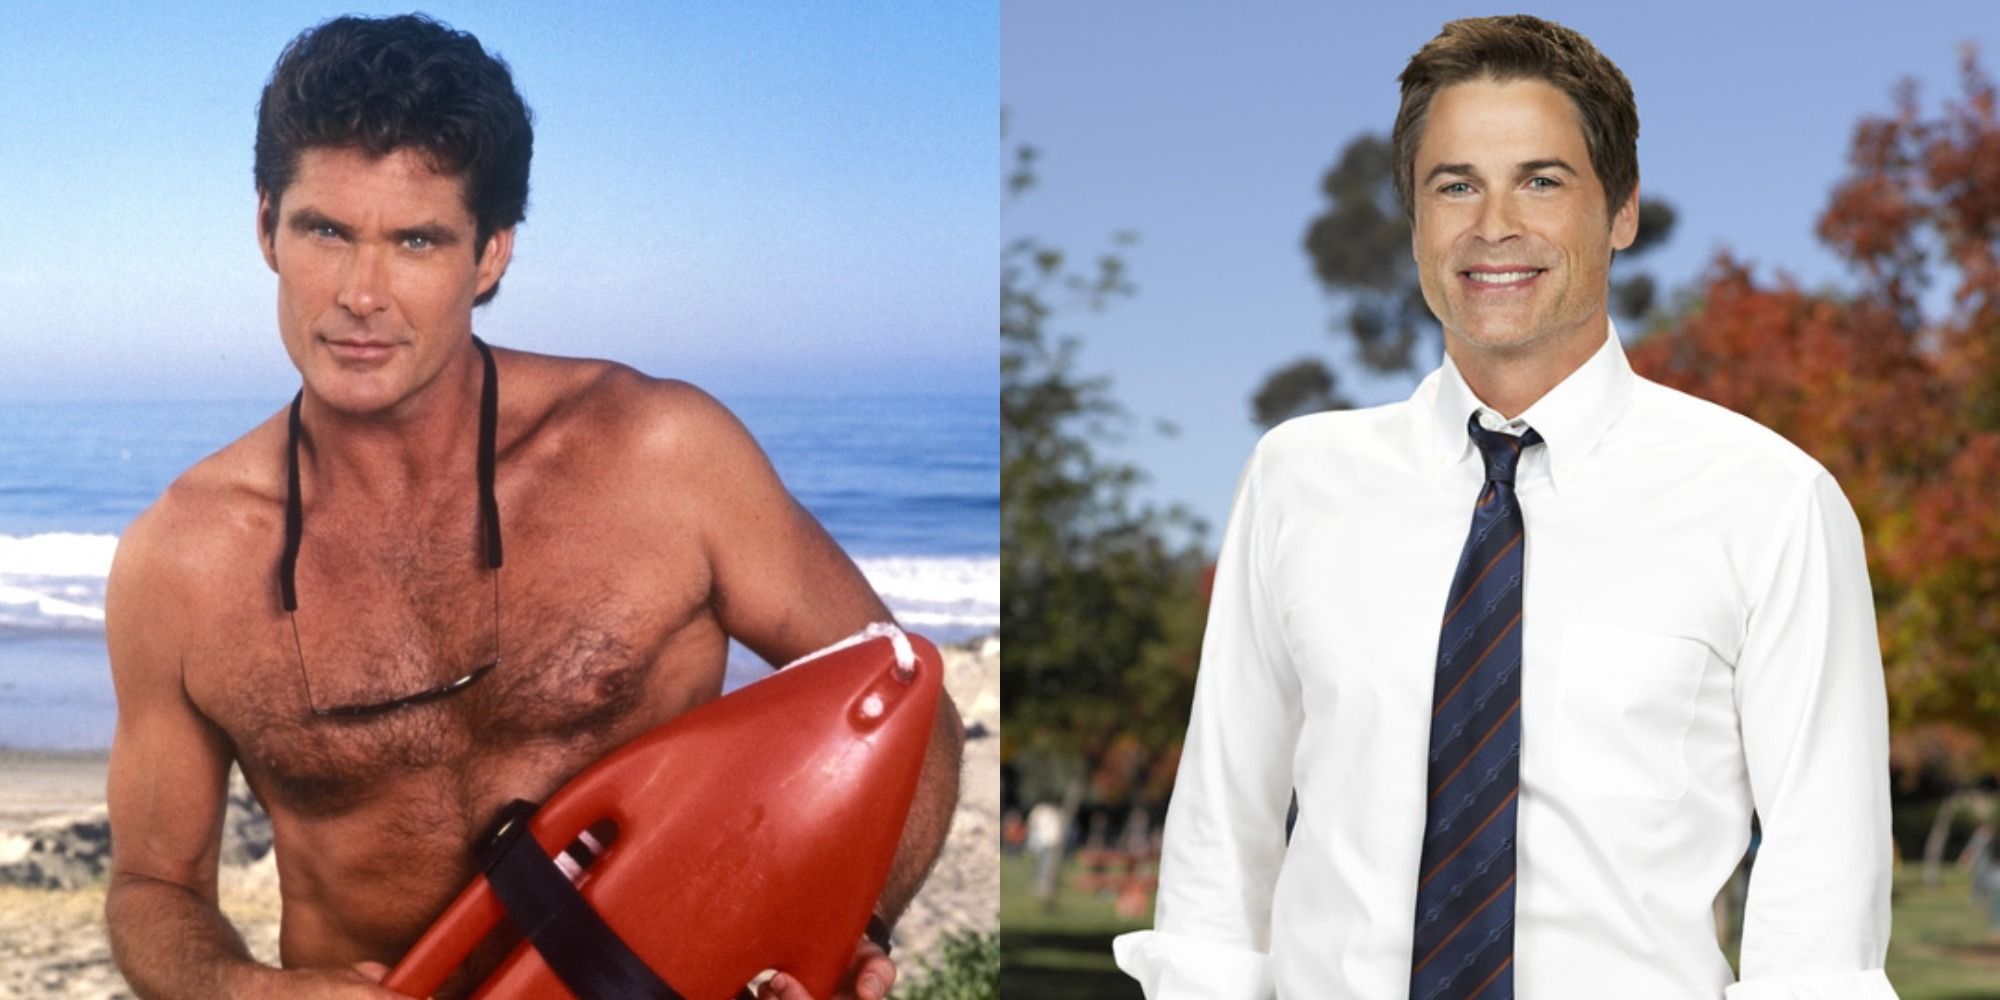 Split image of Mitch from Baywatch and Chris Treager